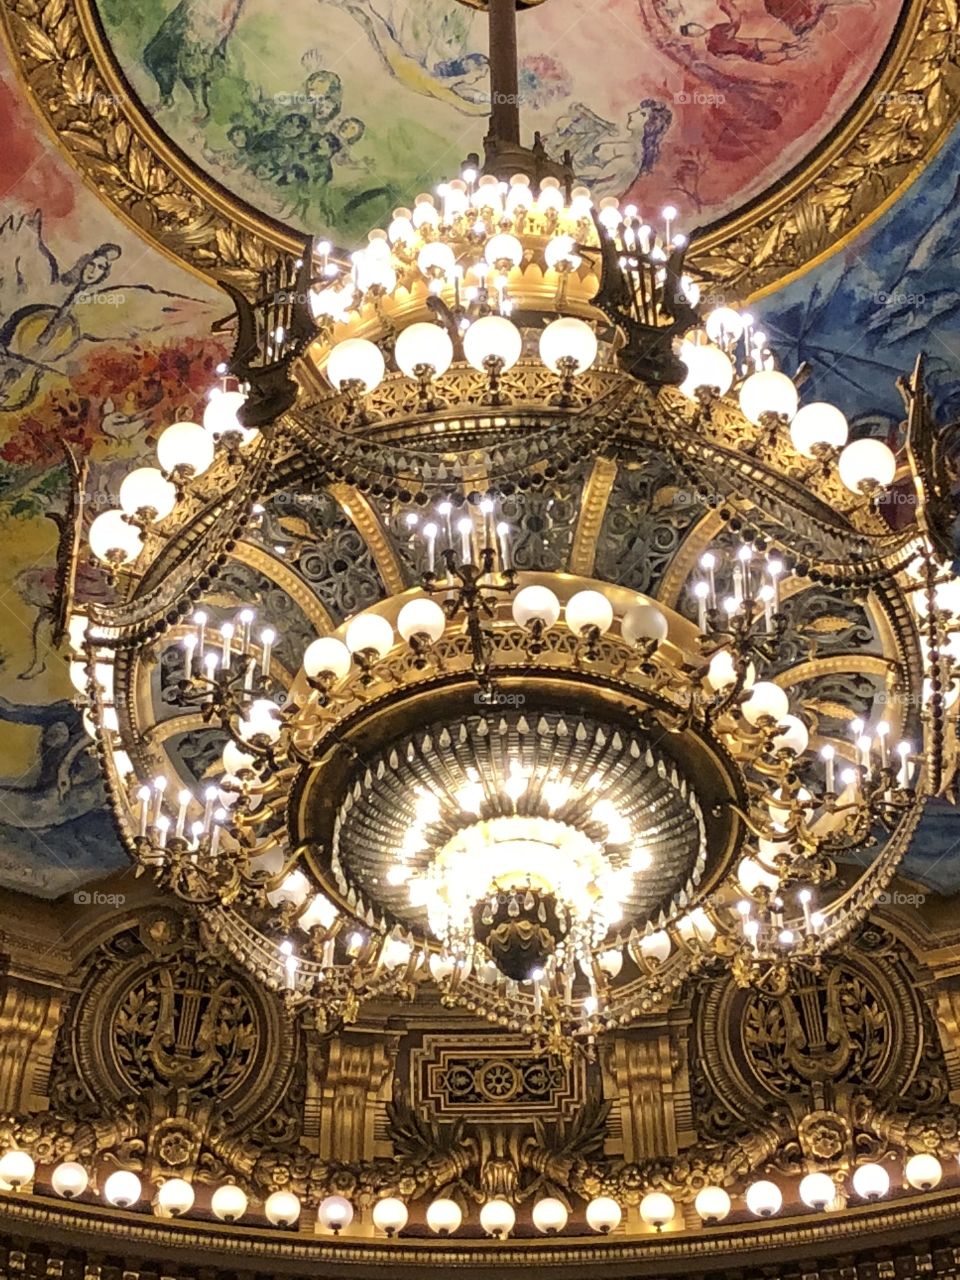 The iconic chandelier which inspired the design of the chandelier from Phantom of the Opera, as seen in the Garnier Opera House in Paris, France. 